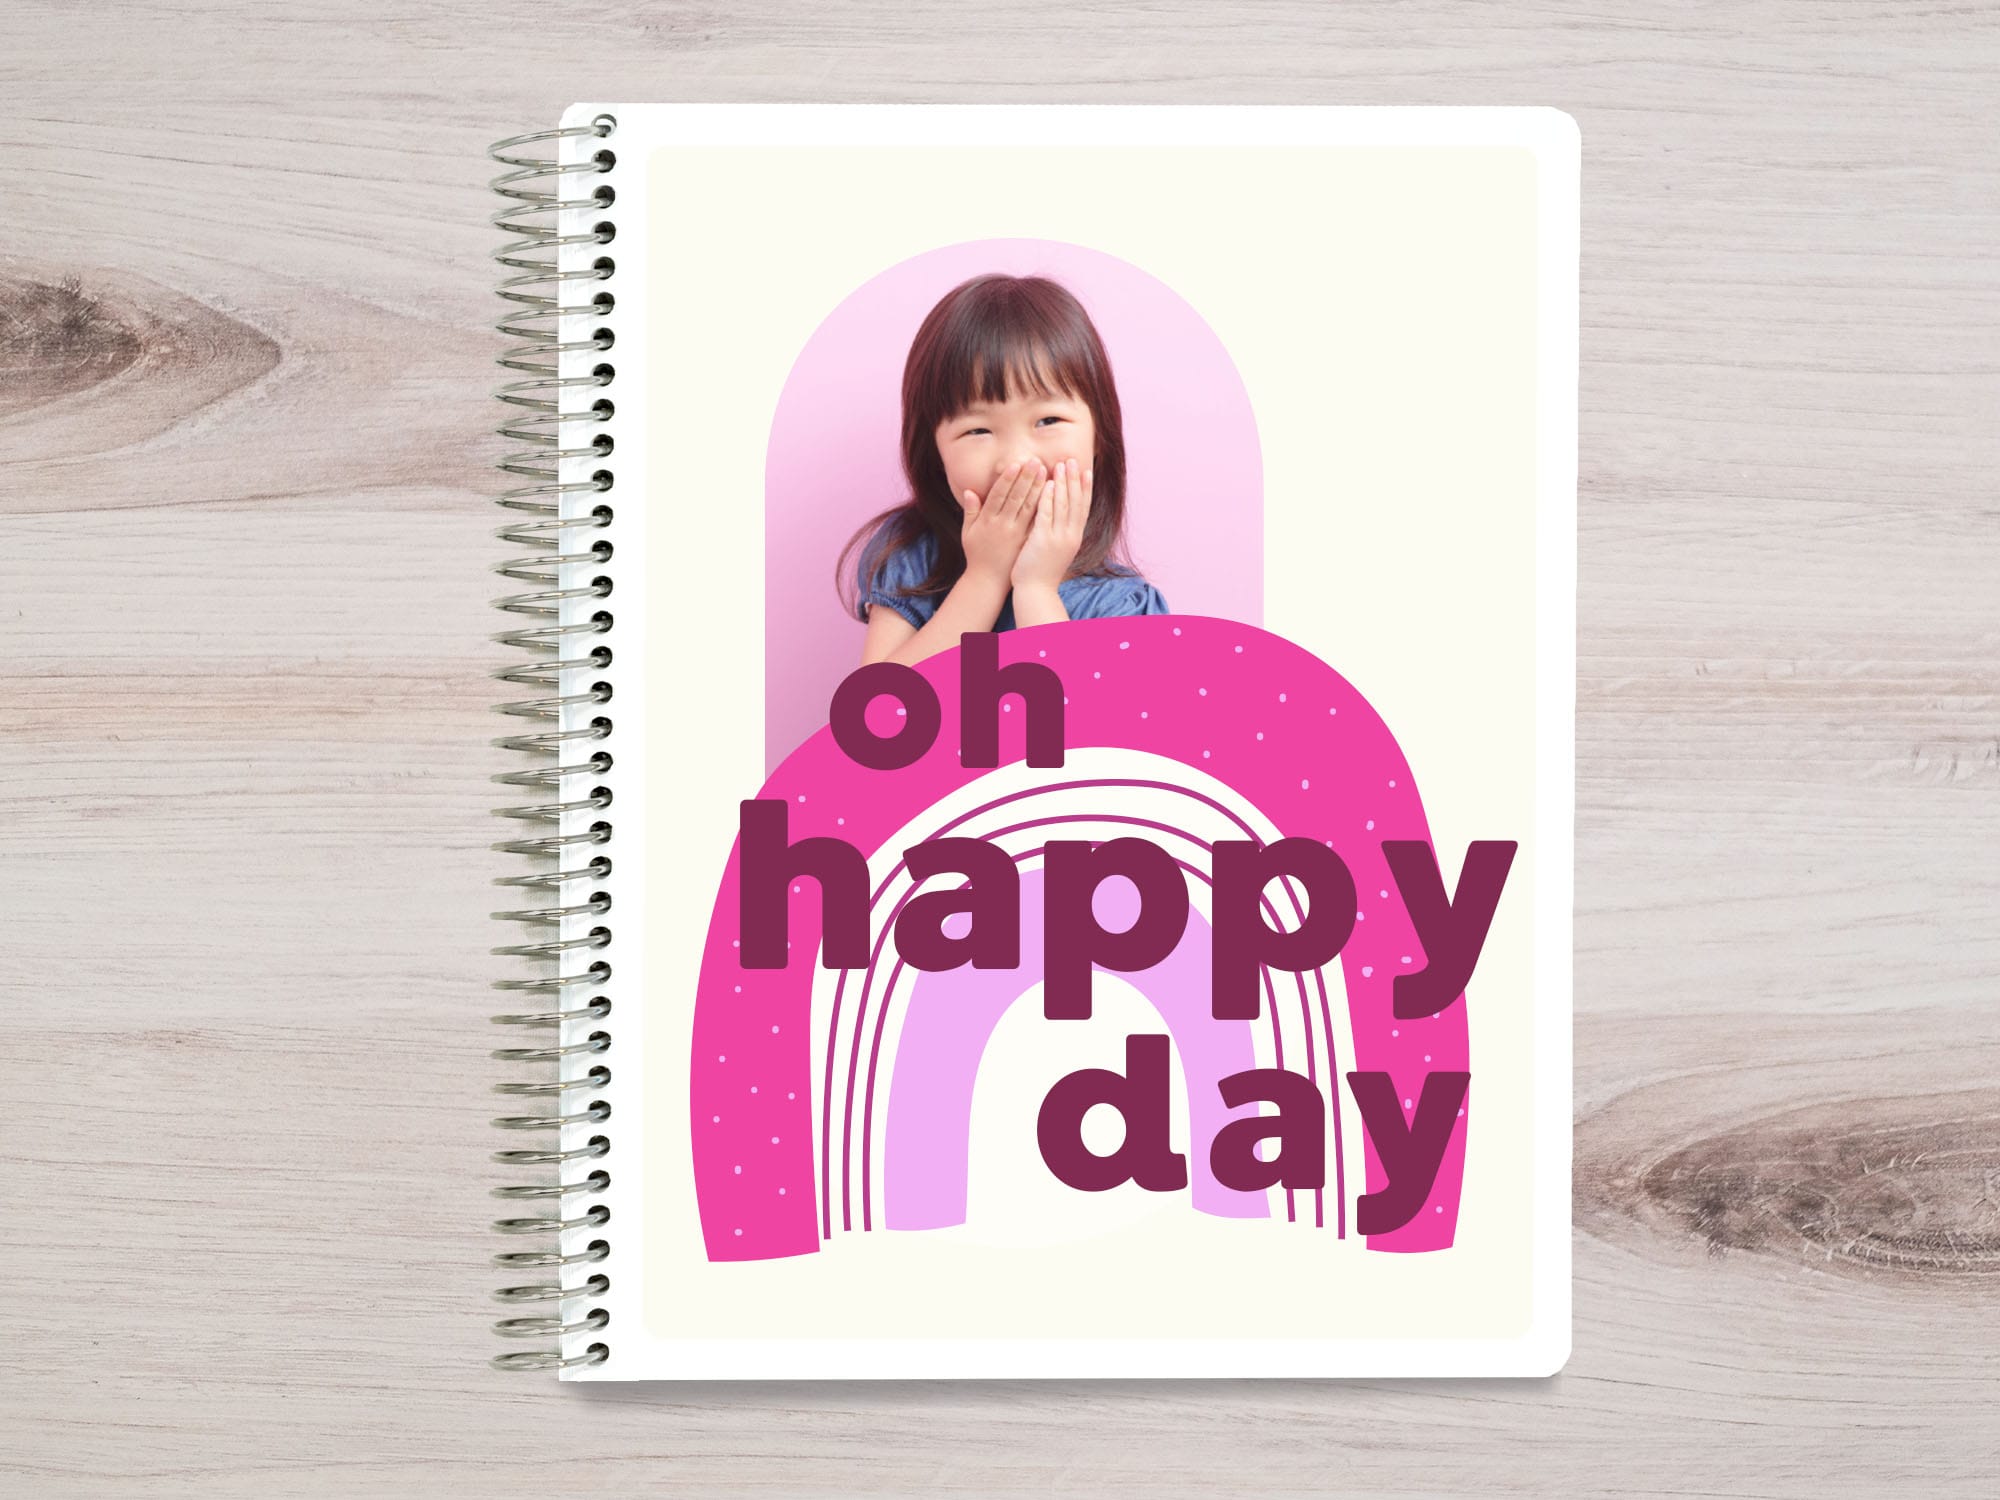 Happy Planner Cover